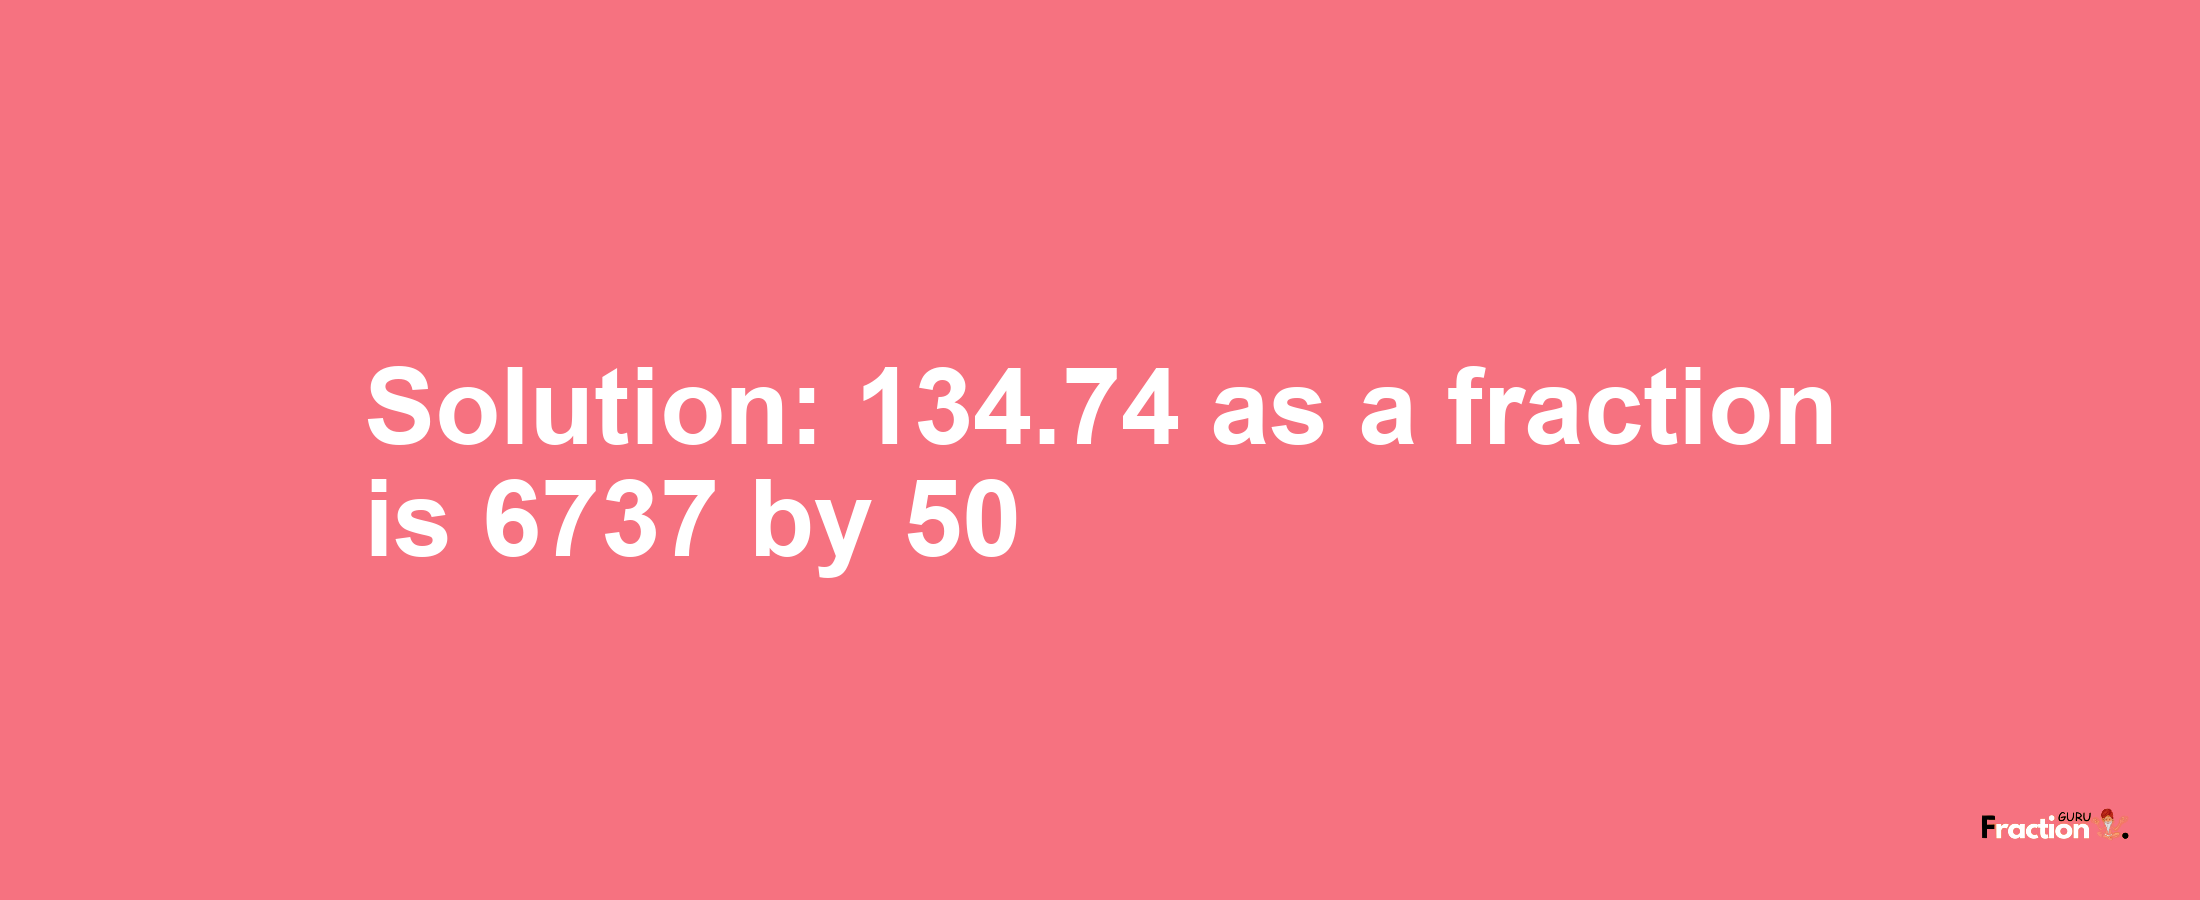 Solution:134.74 as a fraction is 6737/50